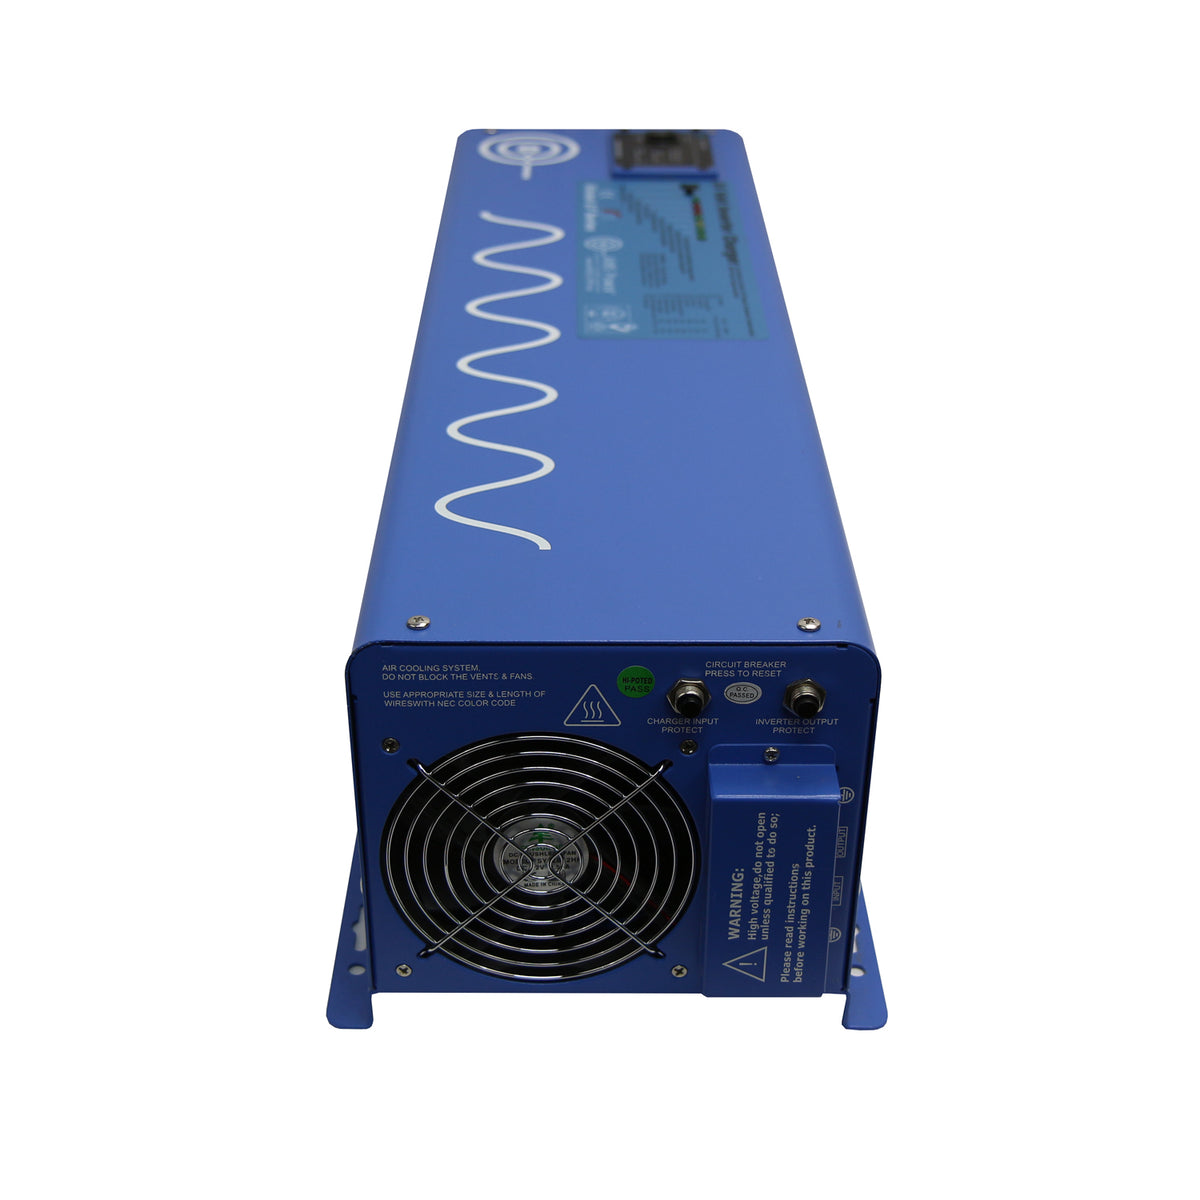 AIMS Power 8000 Watt Pure Sine Inverter Charger 48 Vdc / 240Vac Input &amp; 120/240Vac Split Phase Output ETL Listed to UL 1741